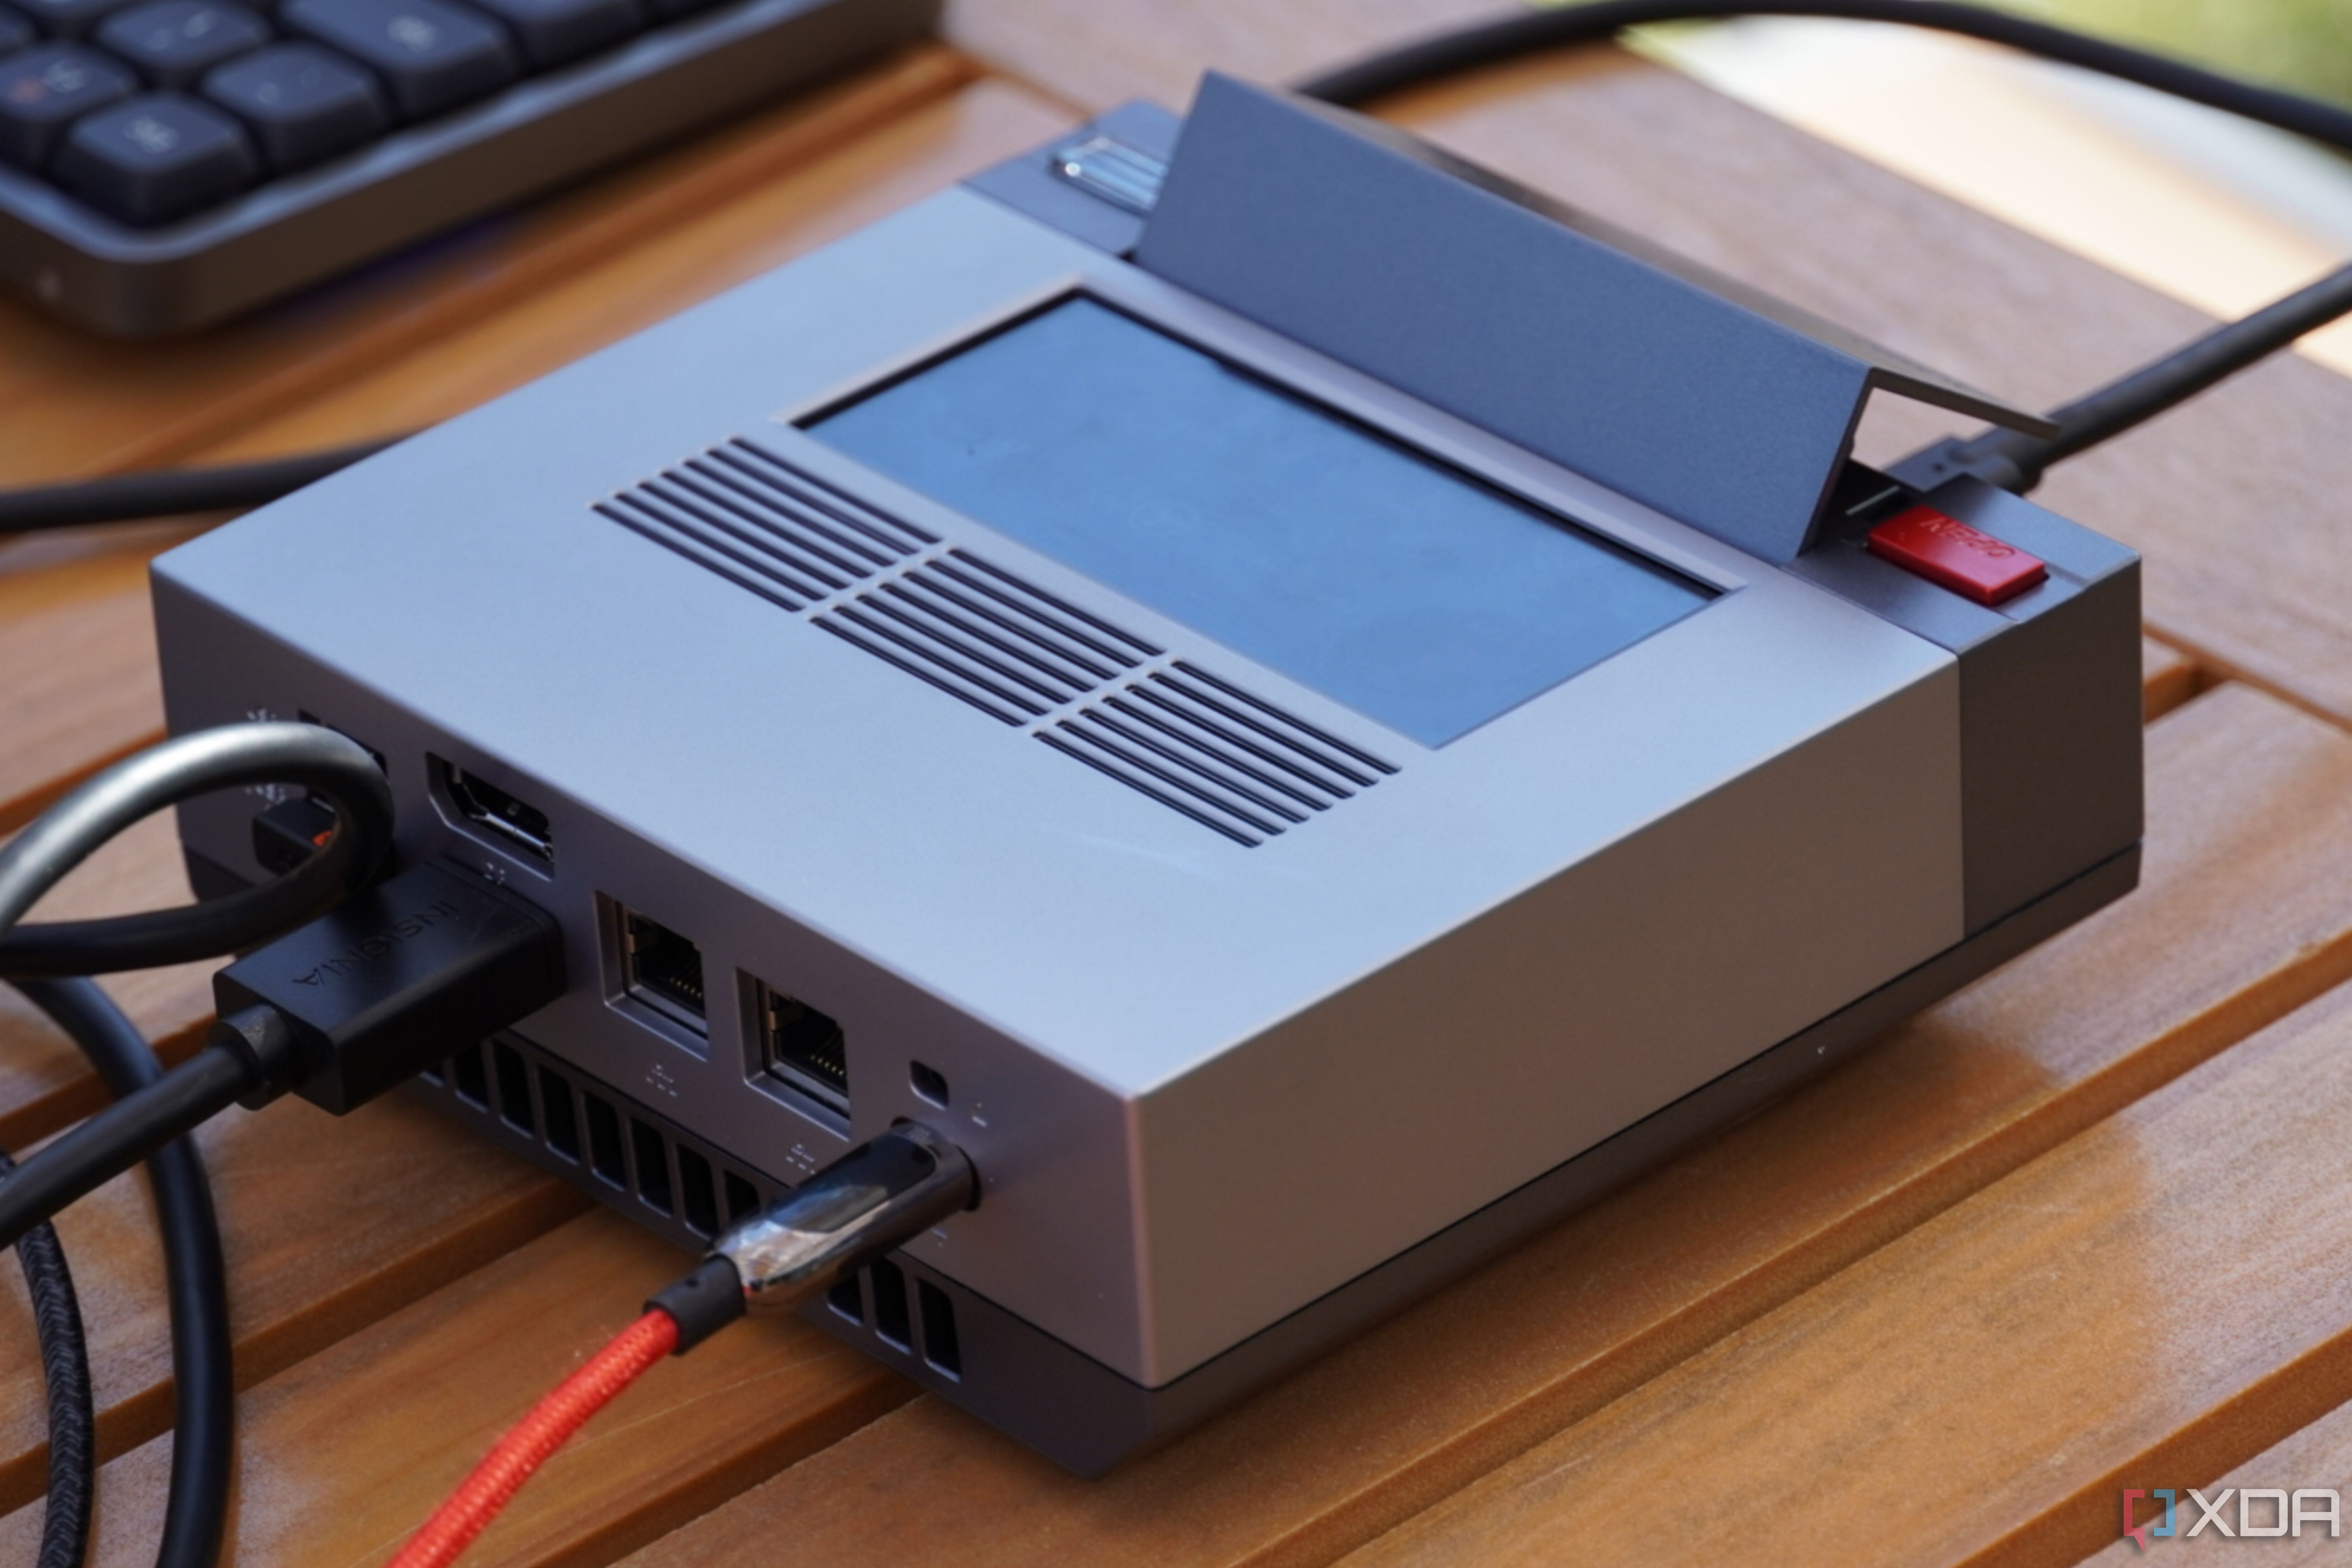 The Ayaneo Mini PC AM02 with cables connected.